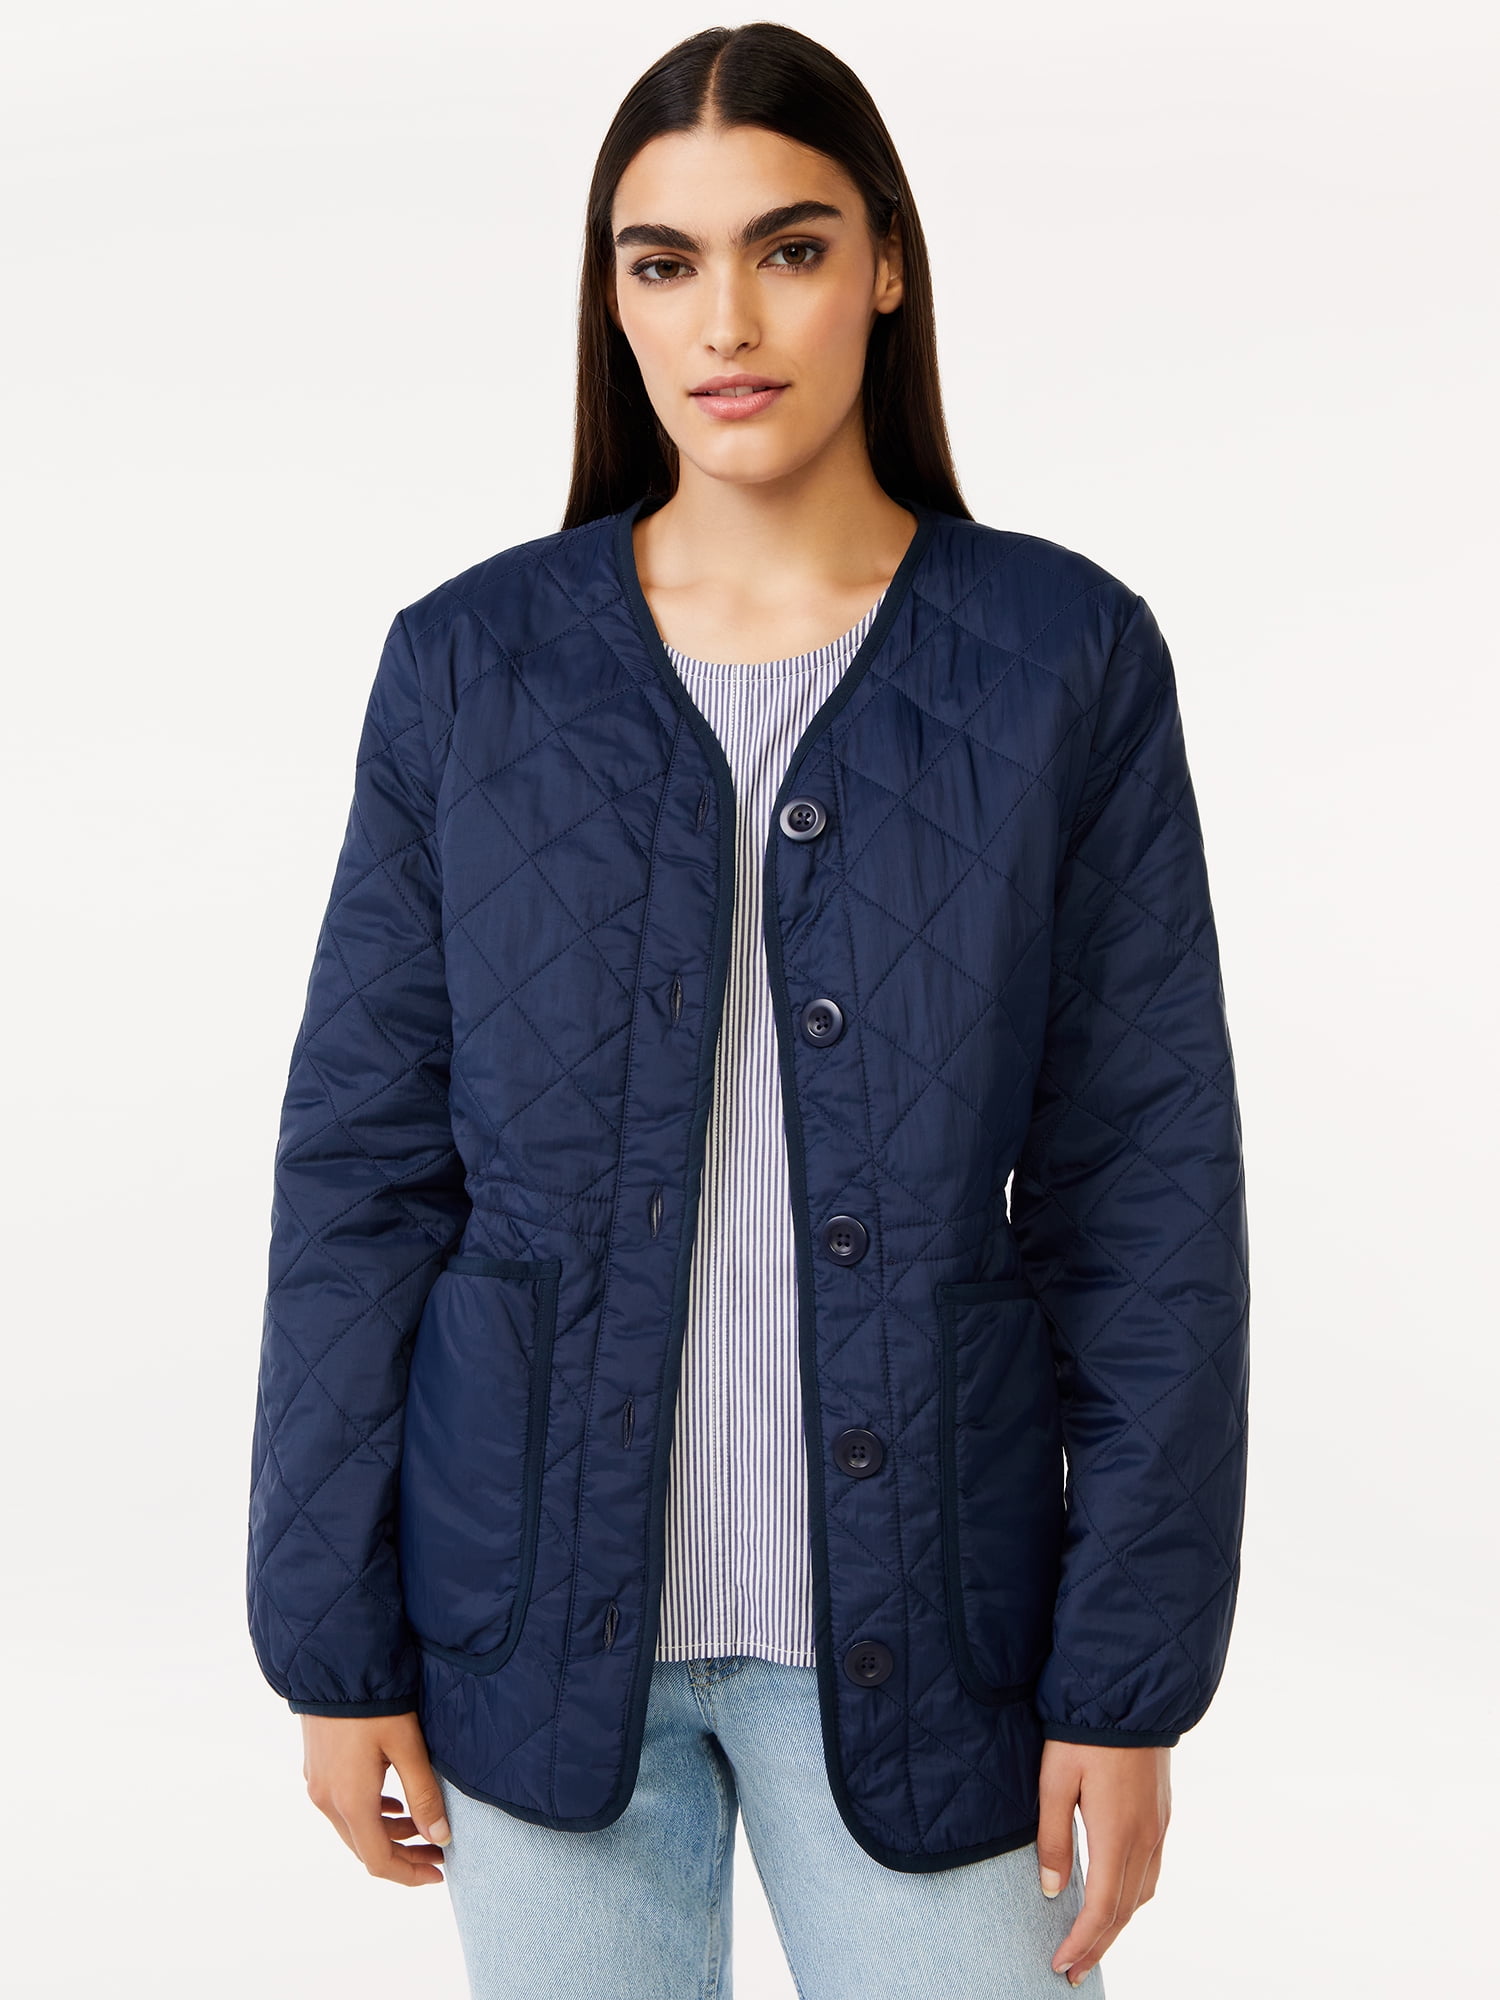 Free Assembly Women's Quilted Cinched Waist Liner Jacket - Walmart.com